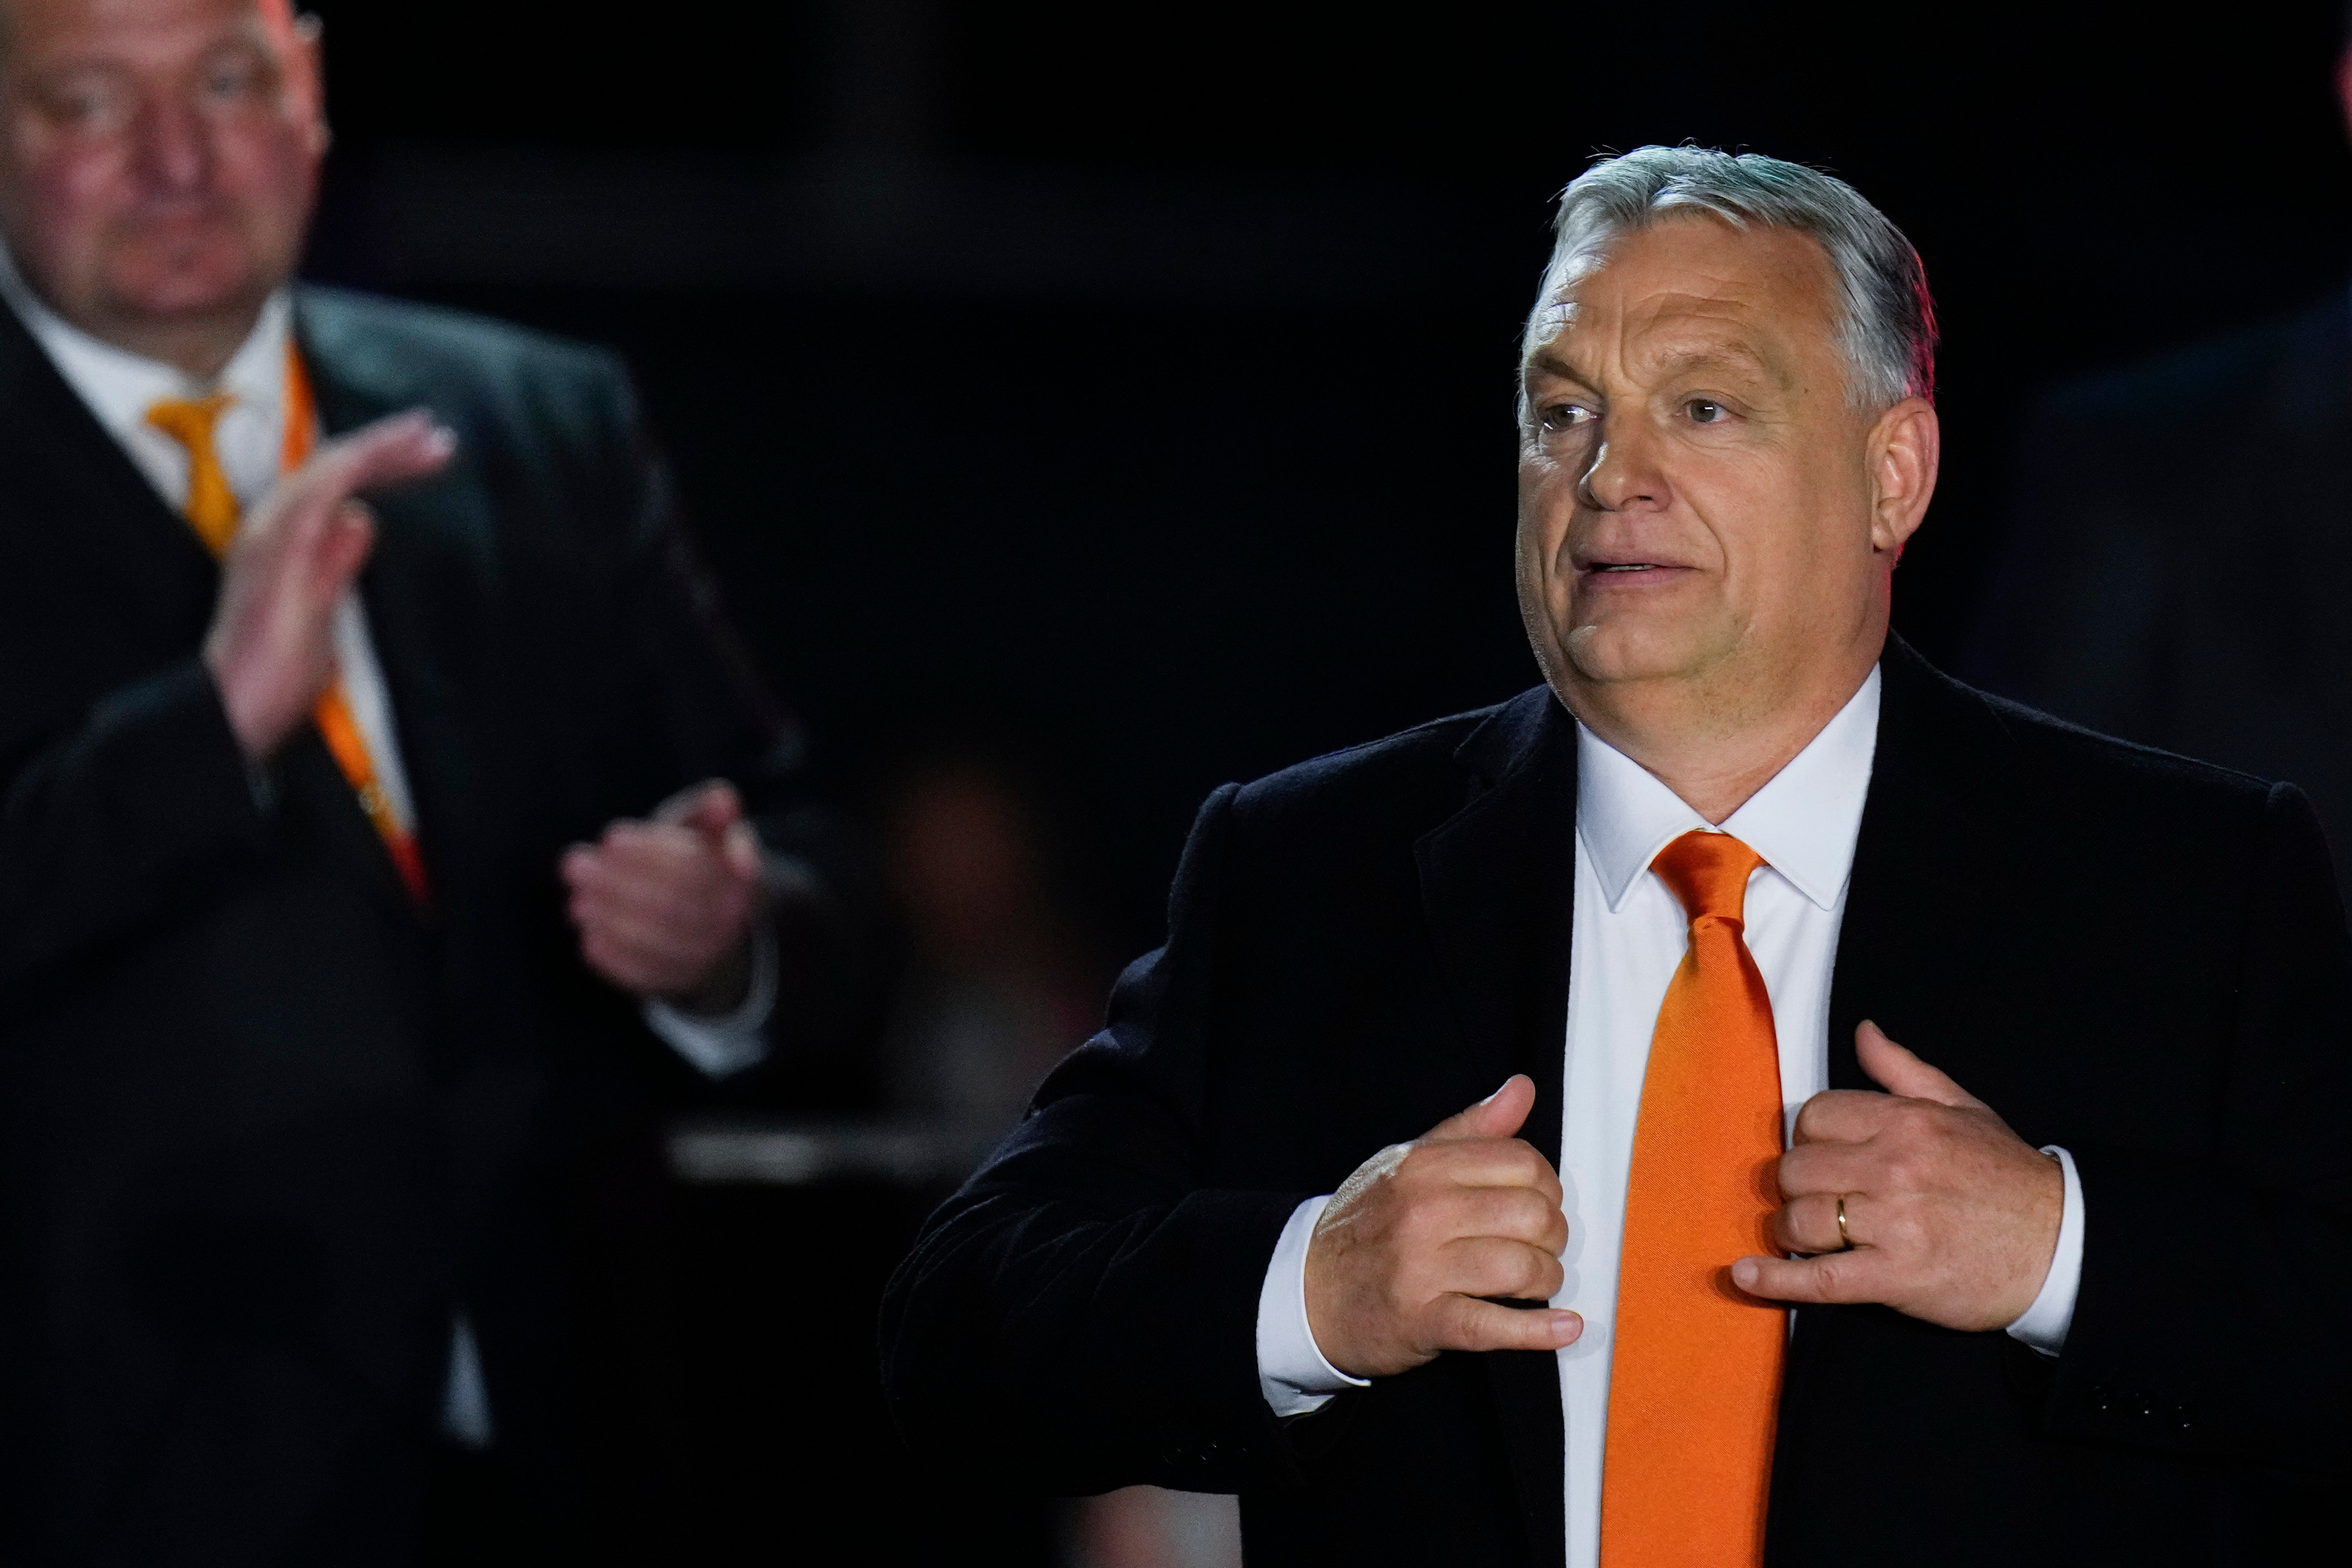 Right-wing populist leaders like Hungary’s Viktor Orban could be bad for the climate, research has found